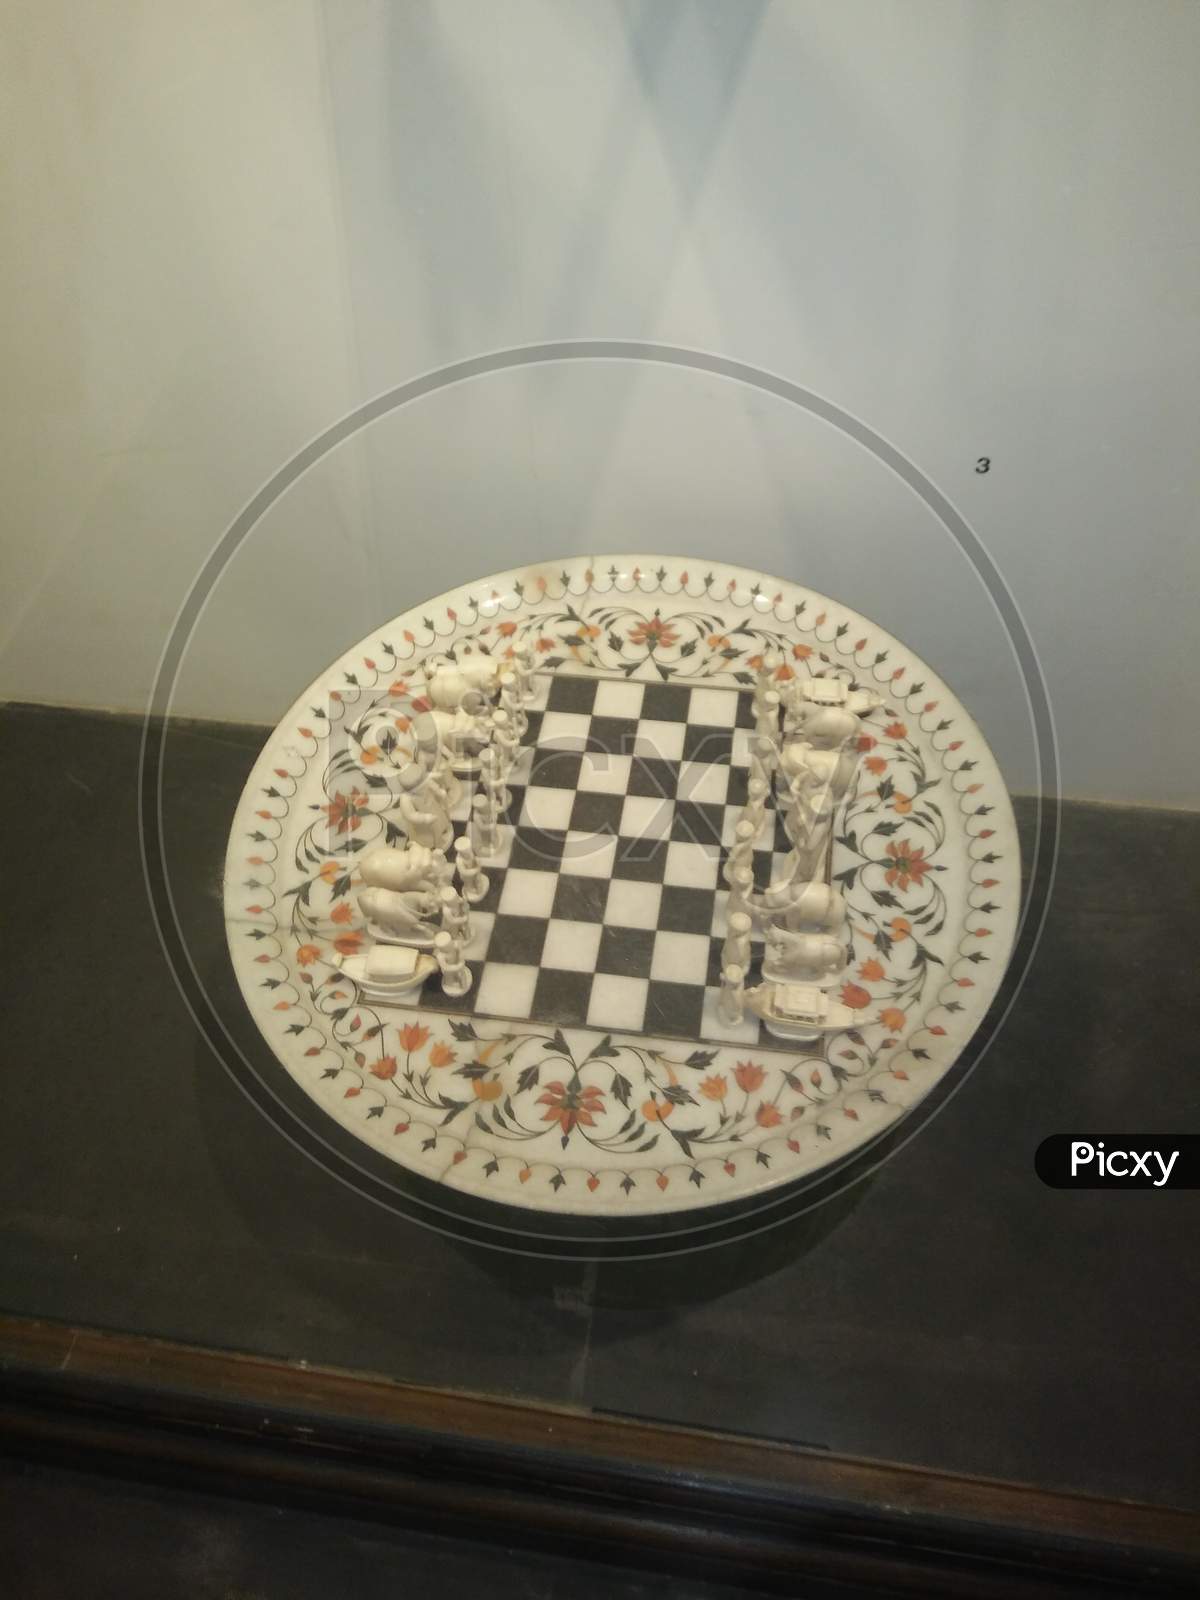 indian old historical chess made of elephant teeth